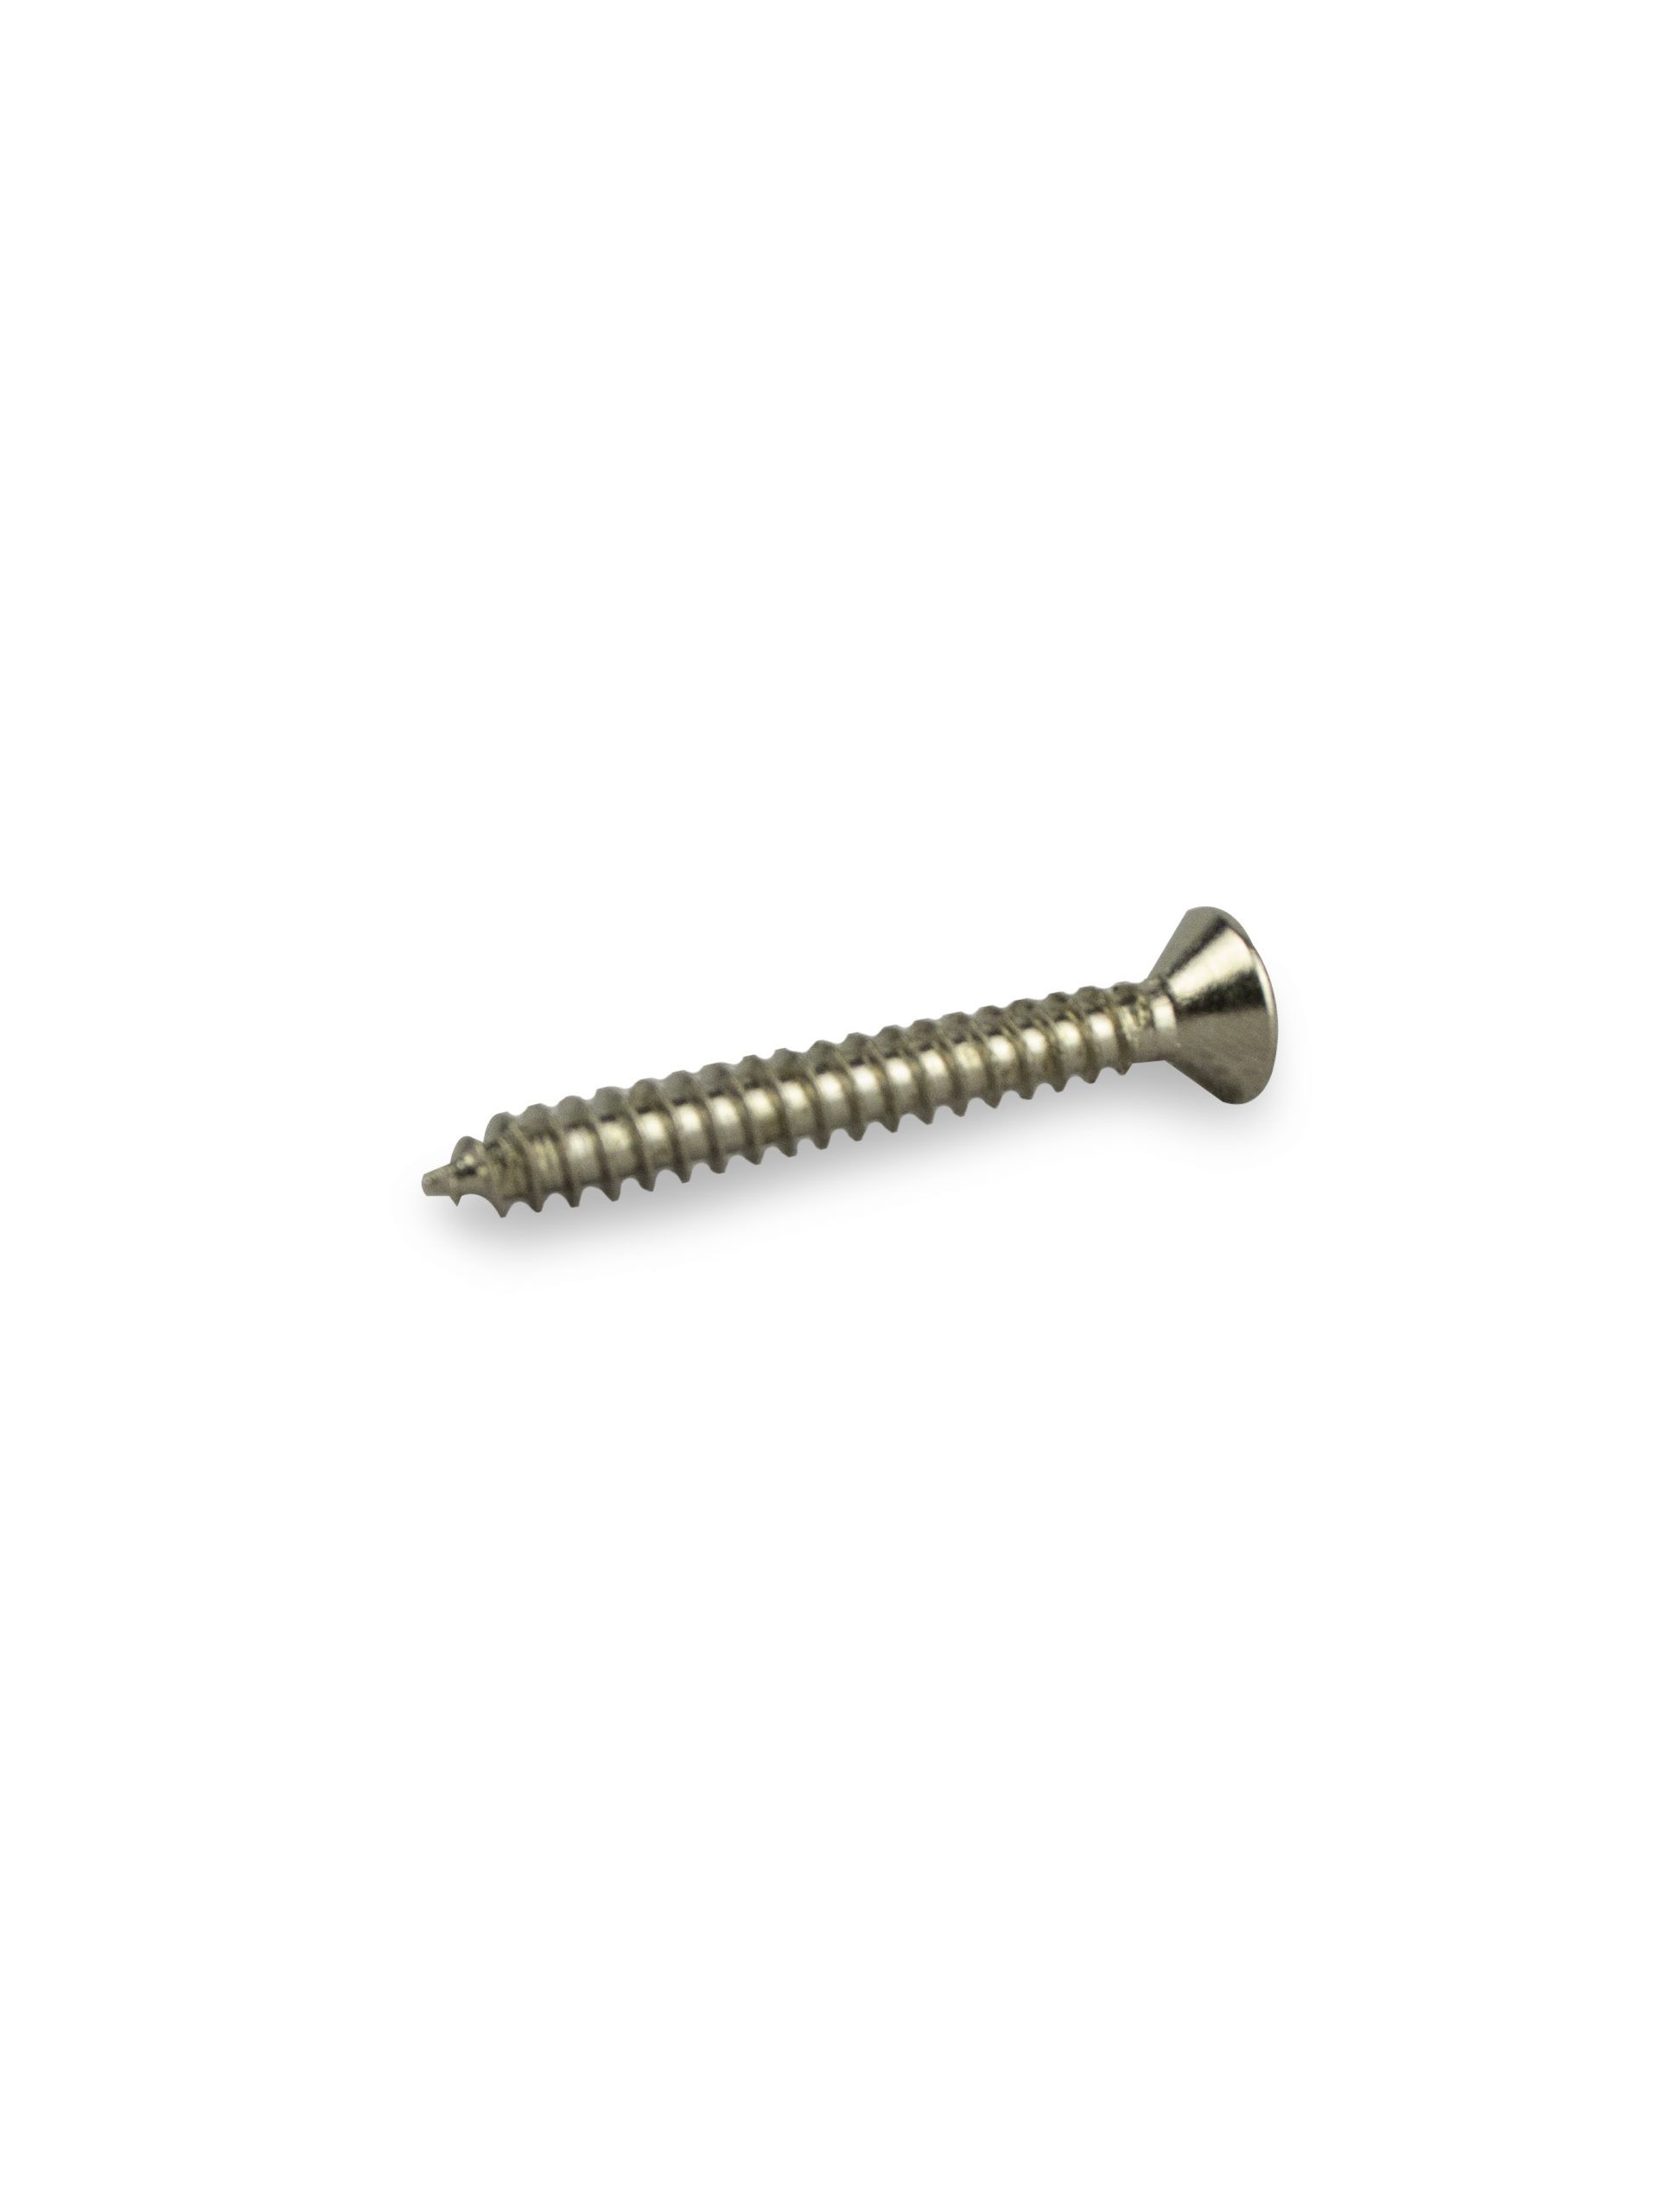 SELF TAPPING SCREW 6MM X1 Inches